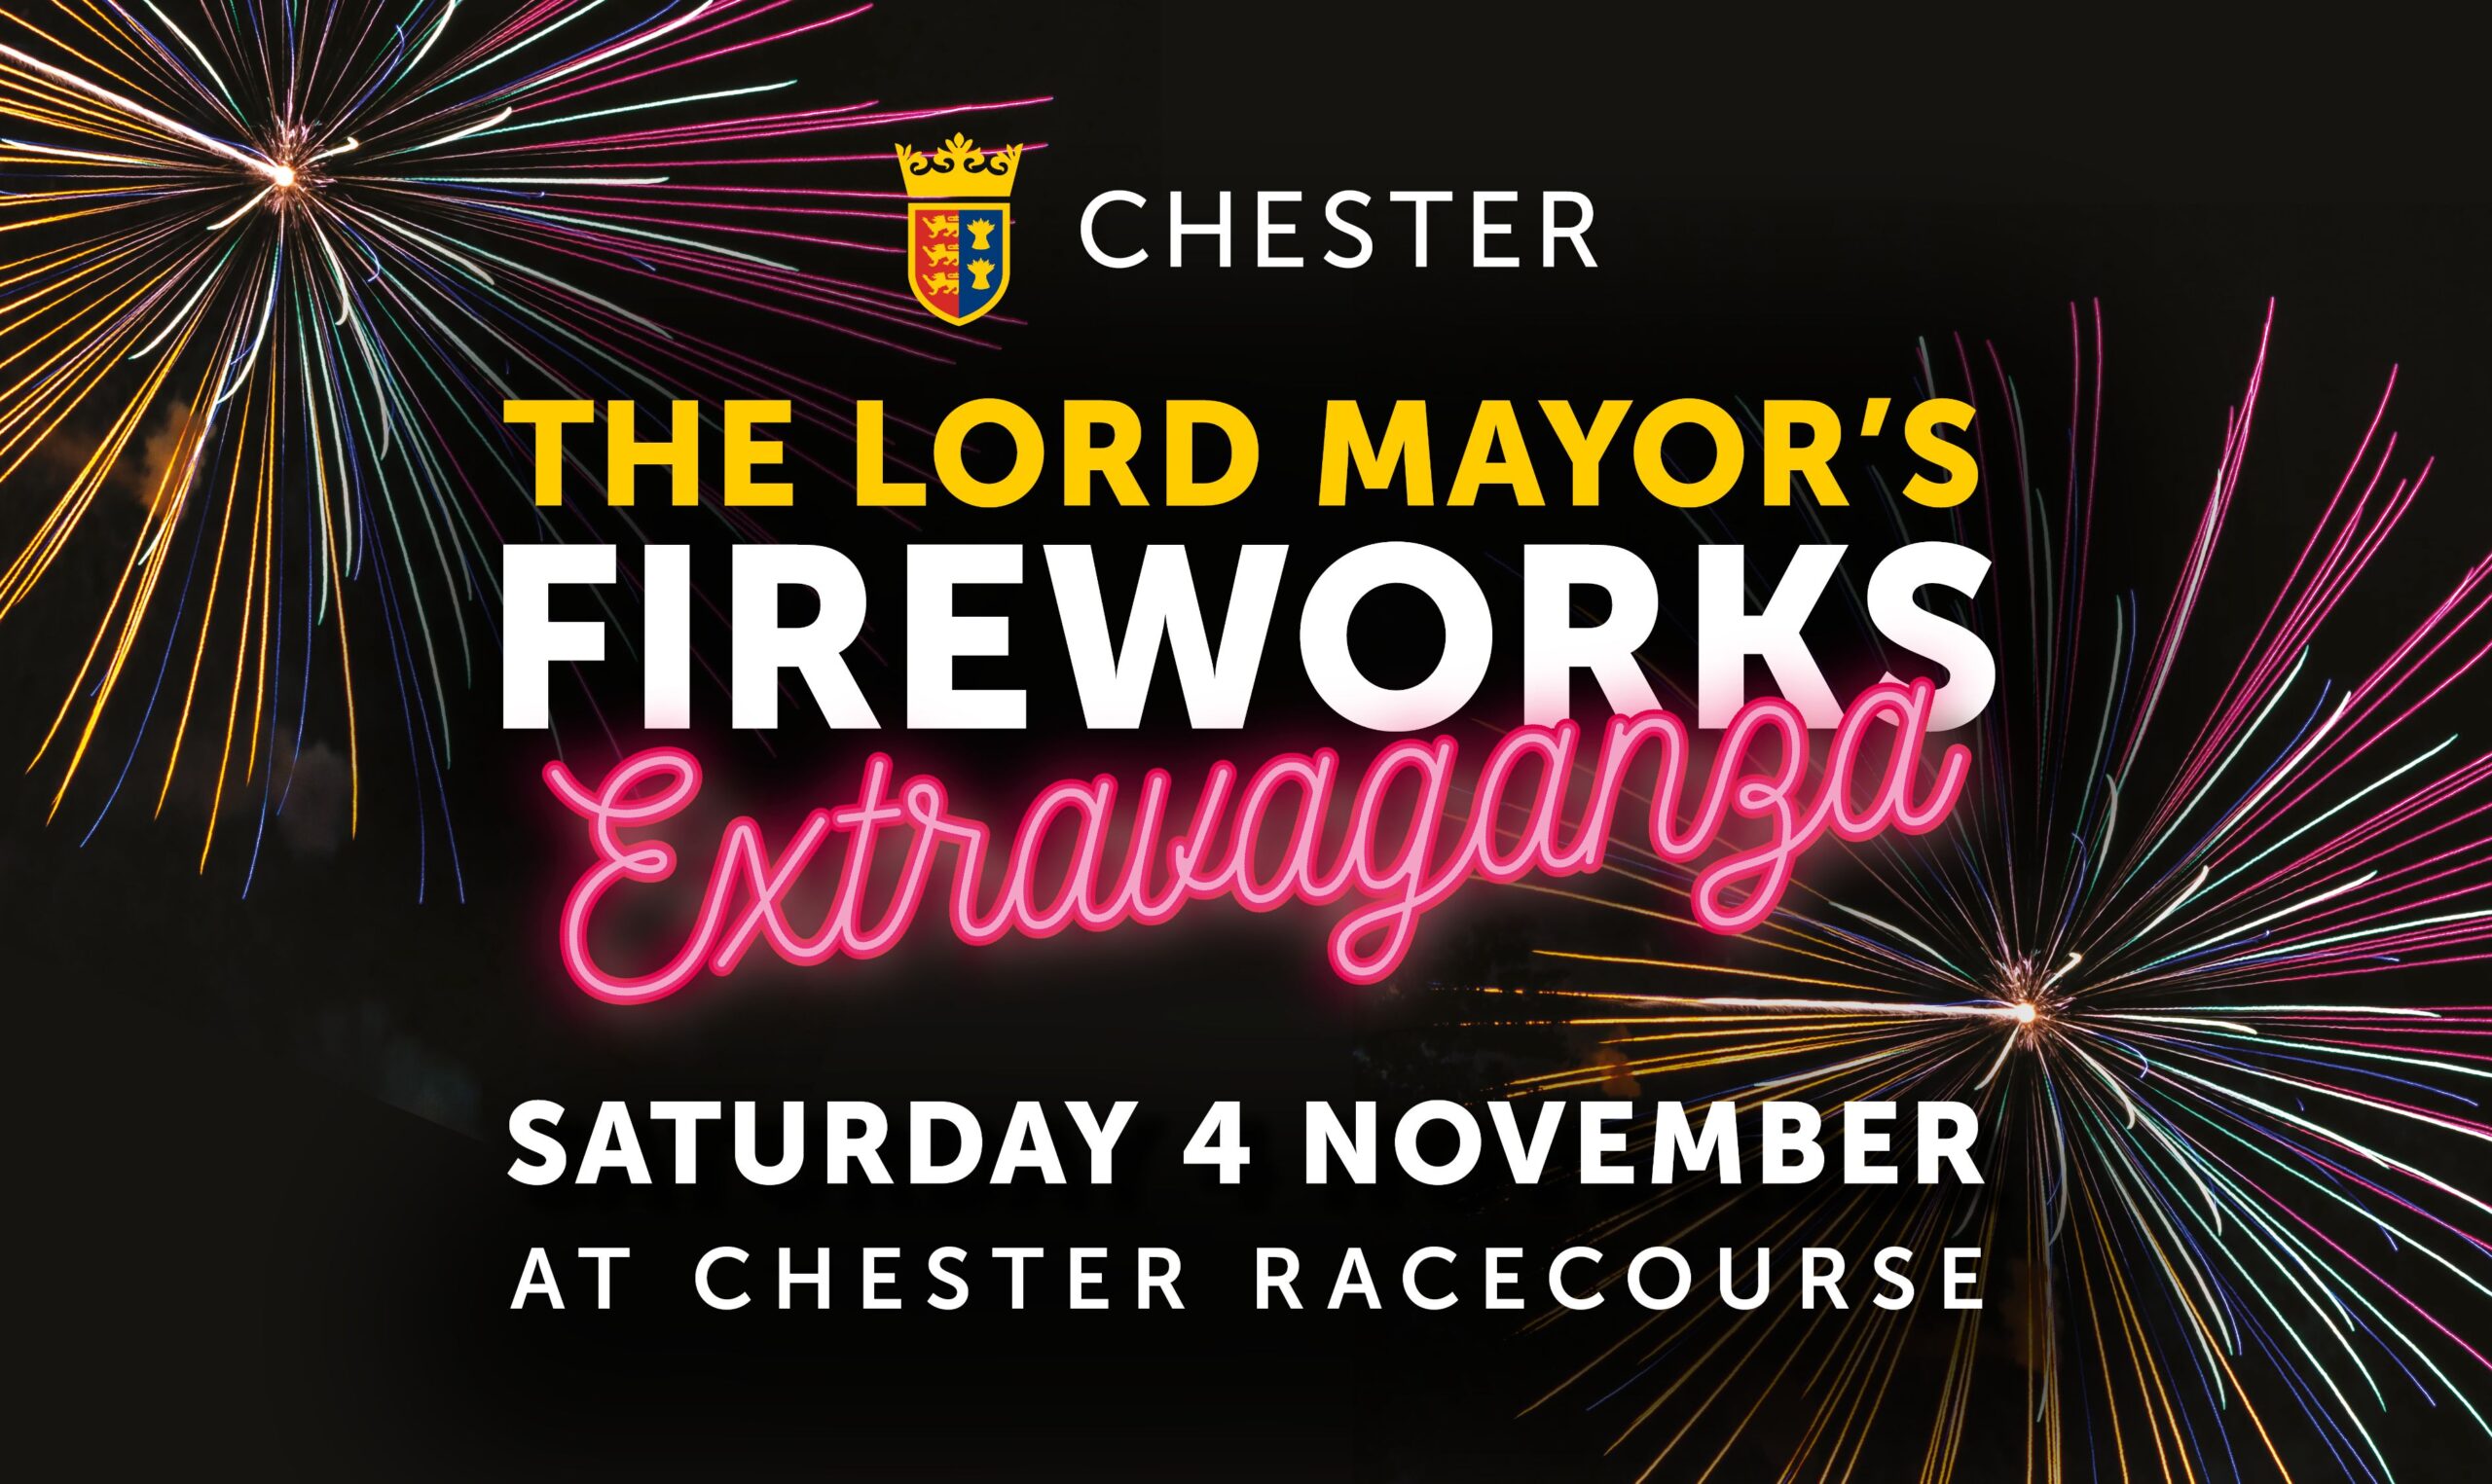 Everything You Need To Know: The Lord Mayor’s Fireworks Extravaganza thumbnail image